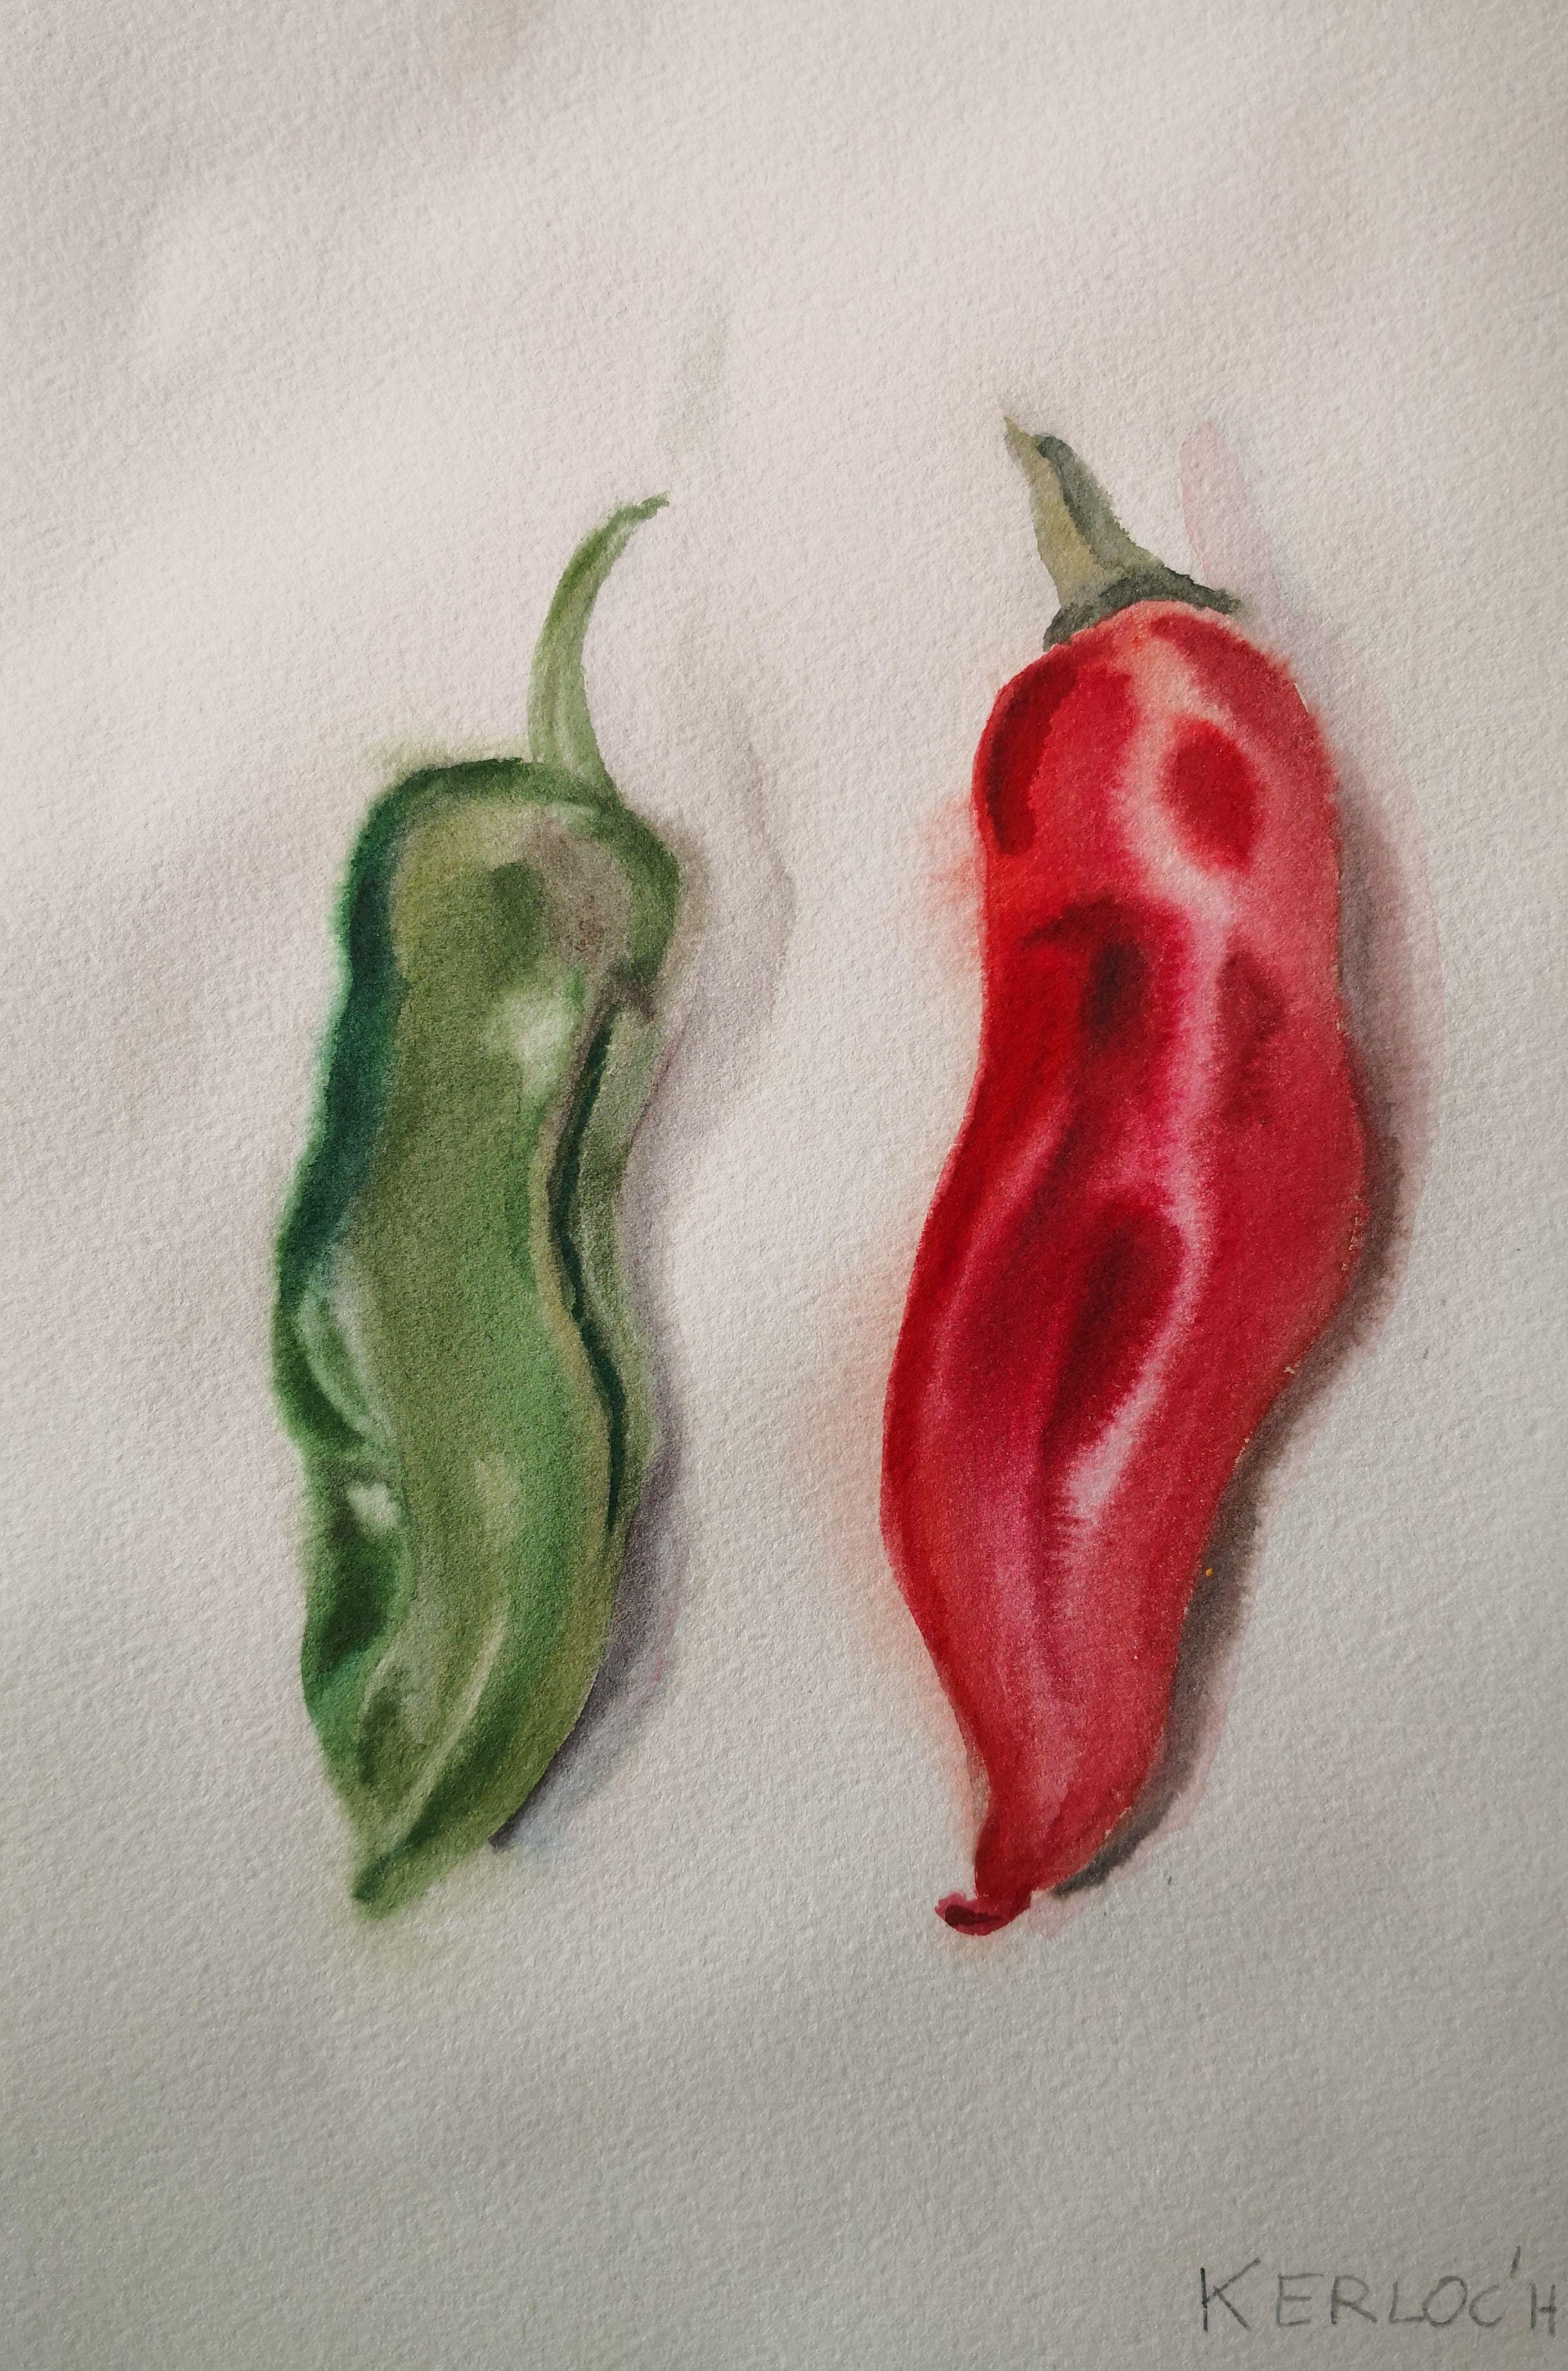 Green and Red Peppers, Painting, Watercolor on Paper - Art by Anyck Alvarez Kerloch